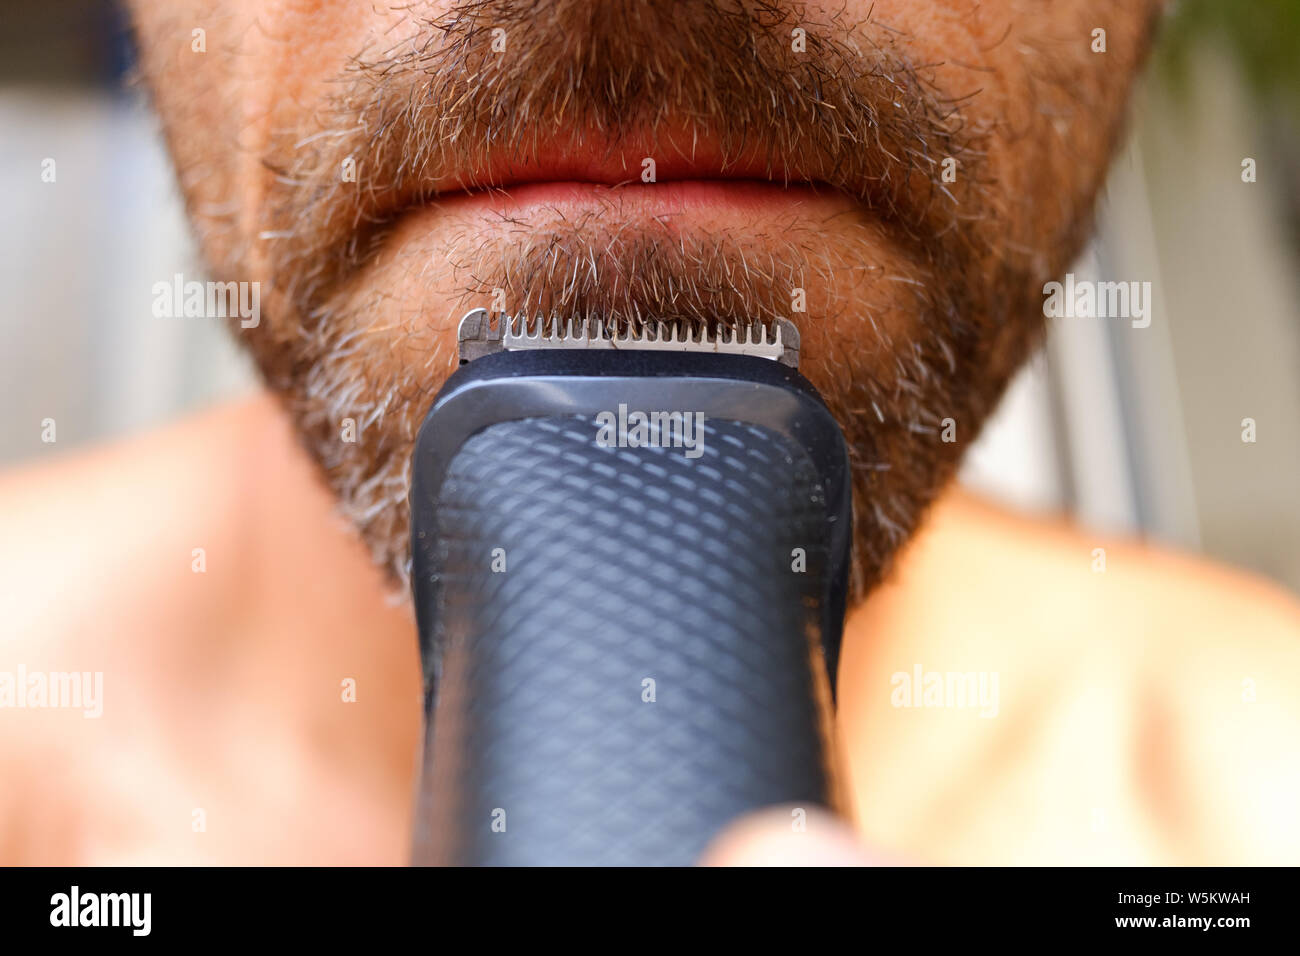 can hair clippers be used to trim beards